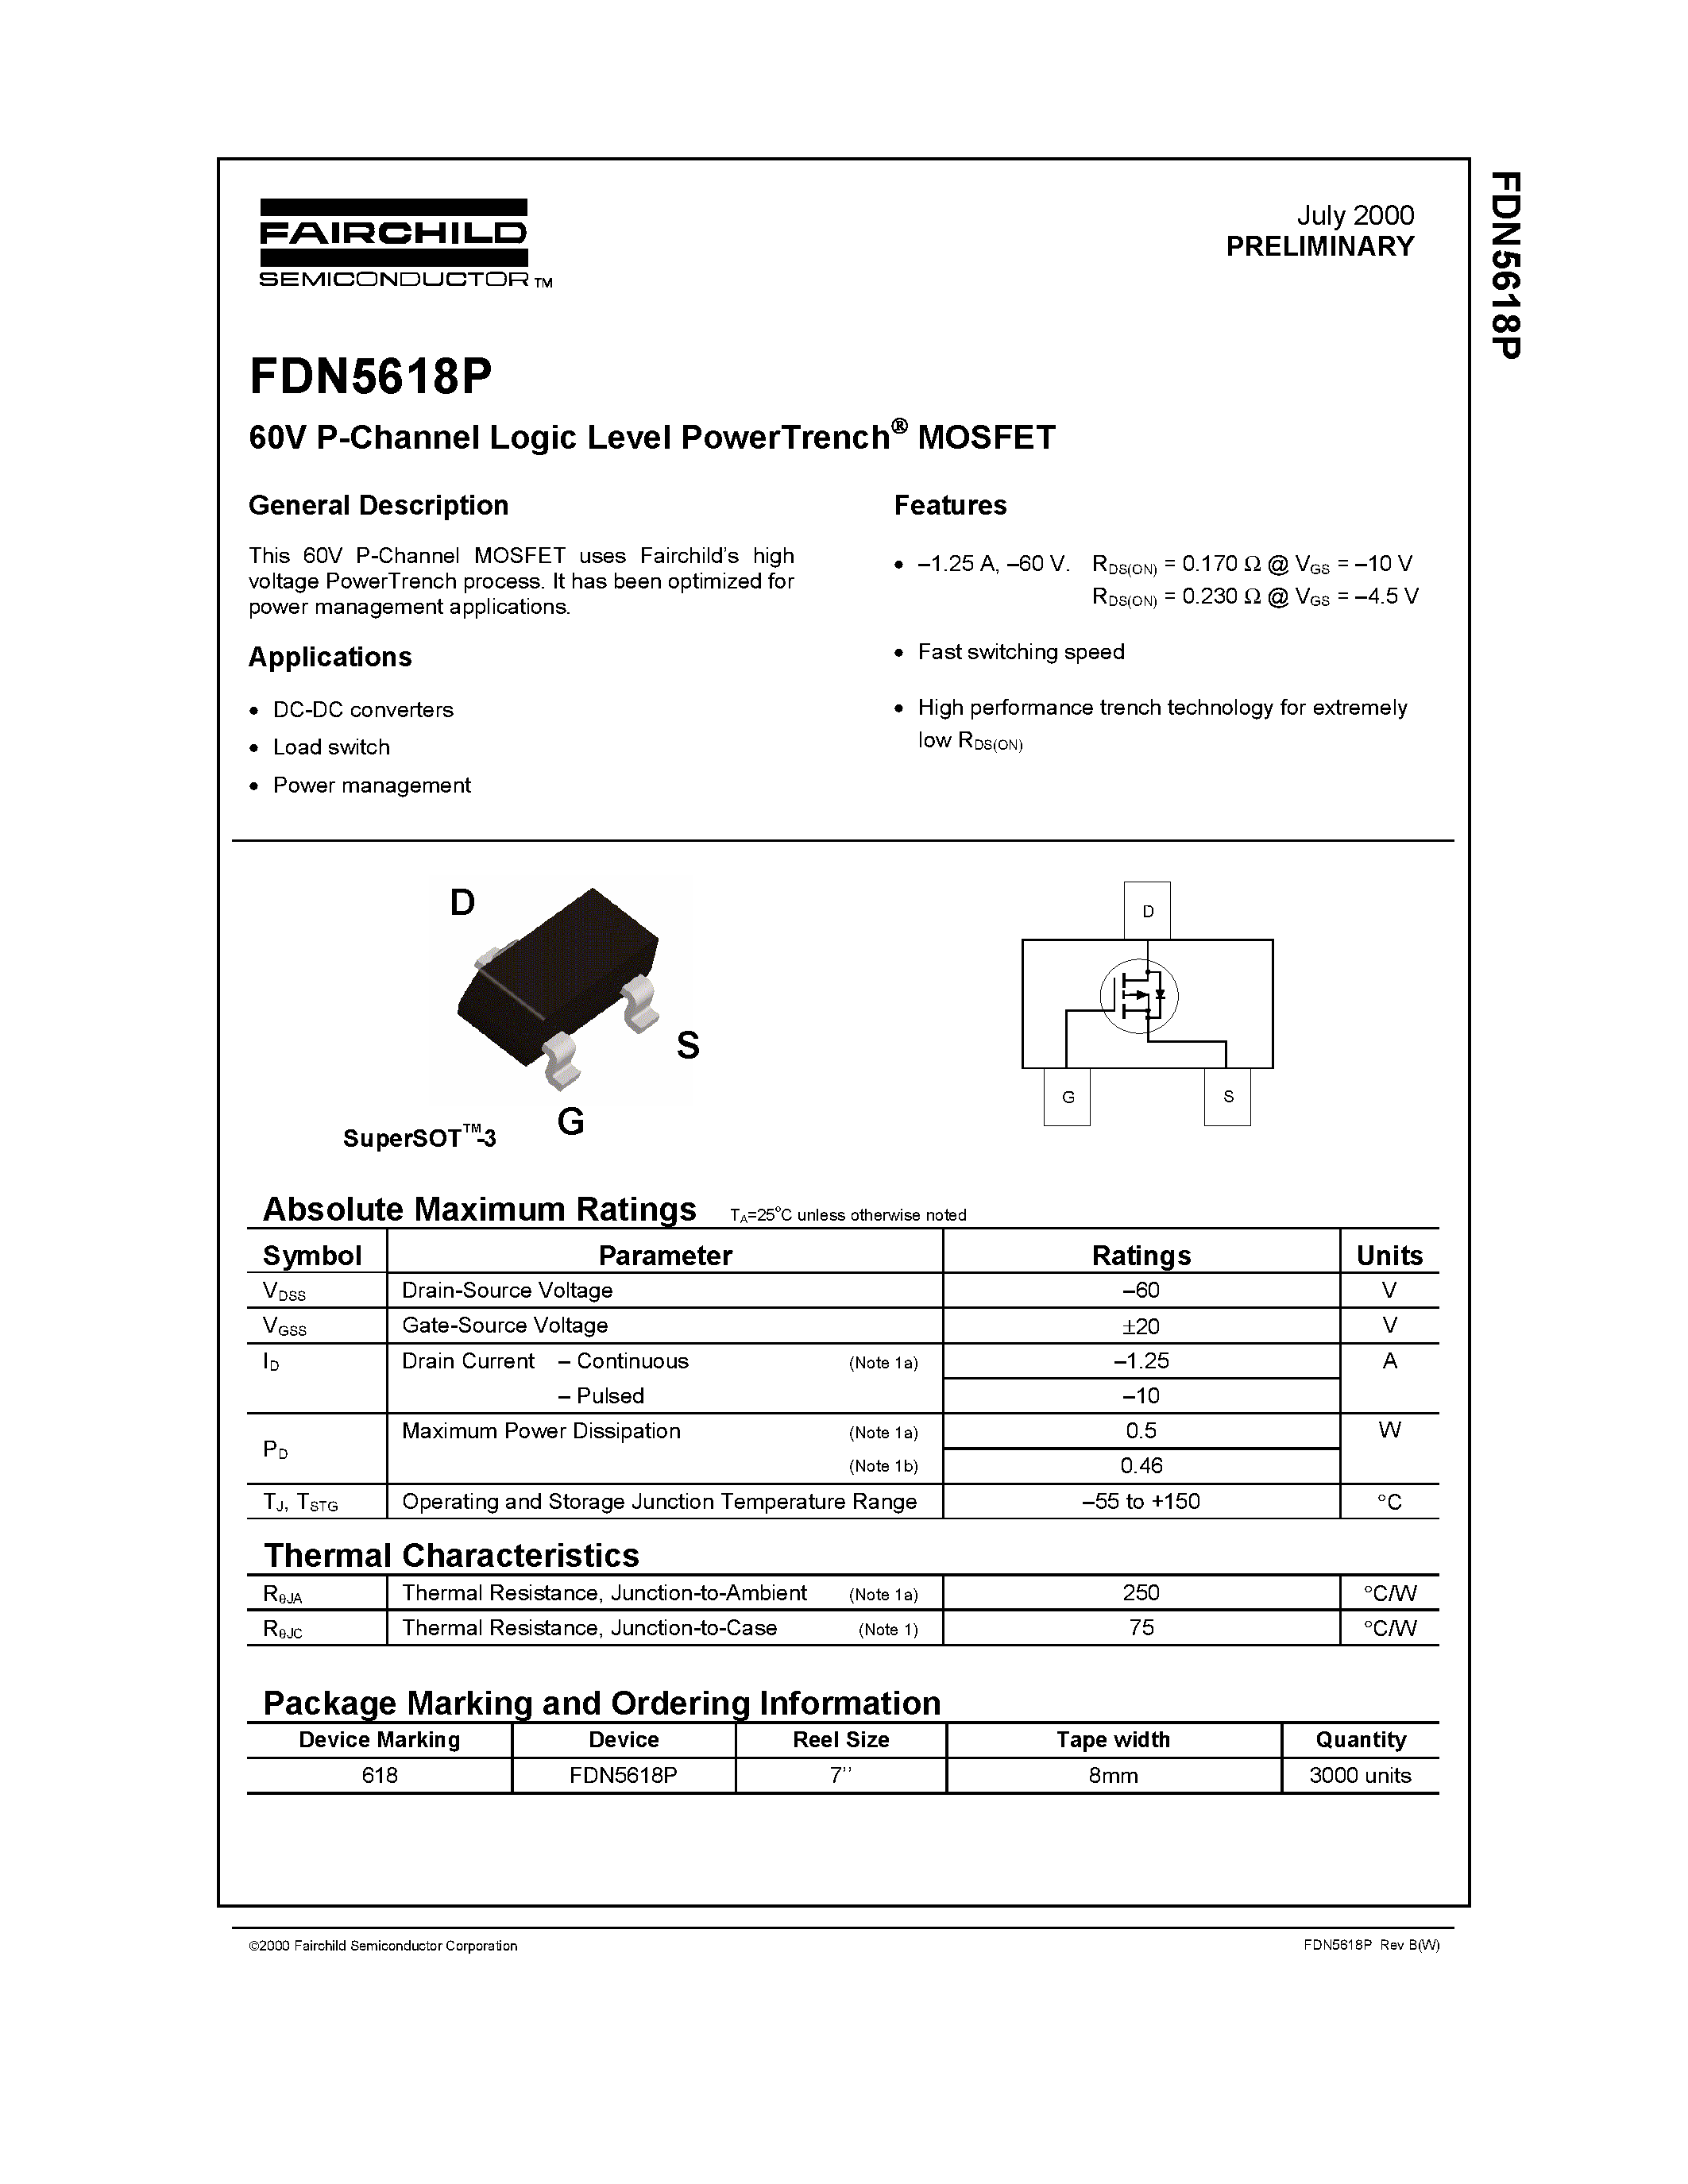 Datasheet FDN5618P - 60V P-Channel Logic Level PowerTrench MOSFET page 1